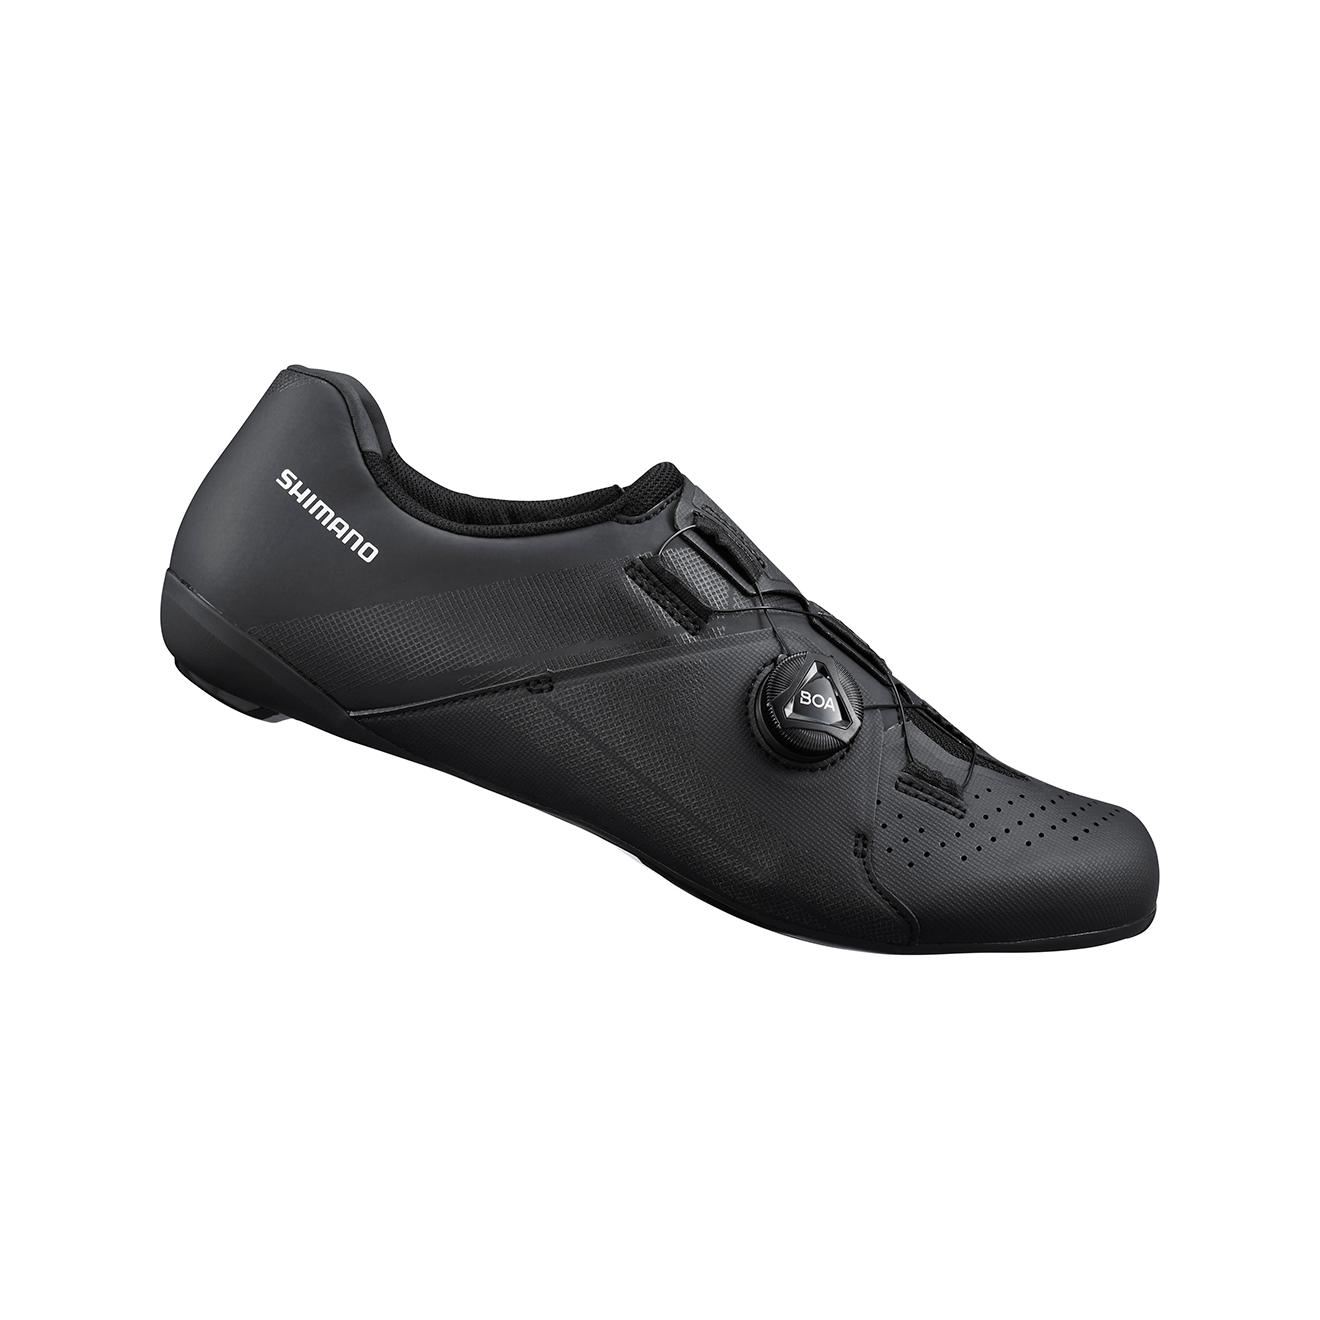 Shimano Chaussures route RC300 Noir 47 